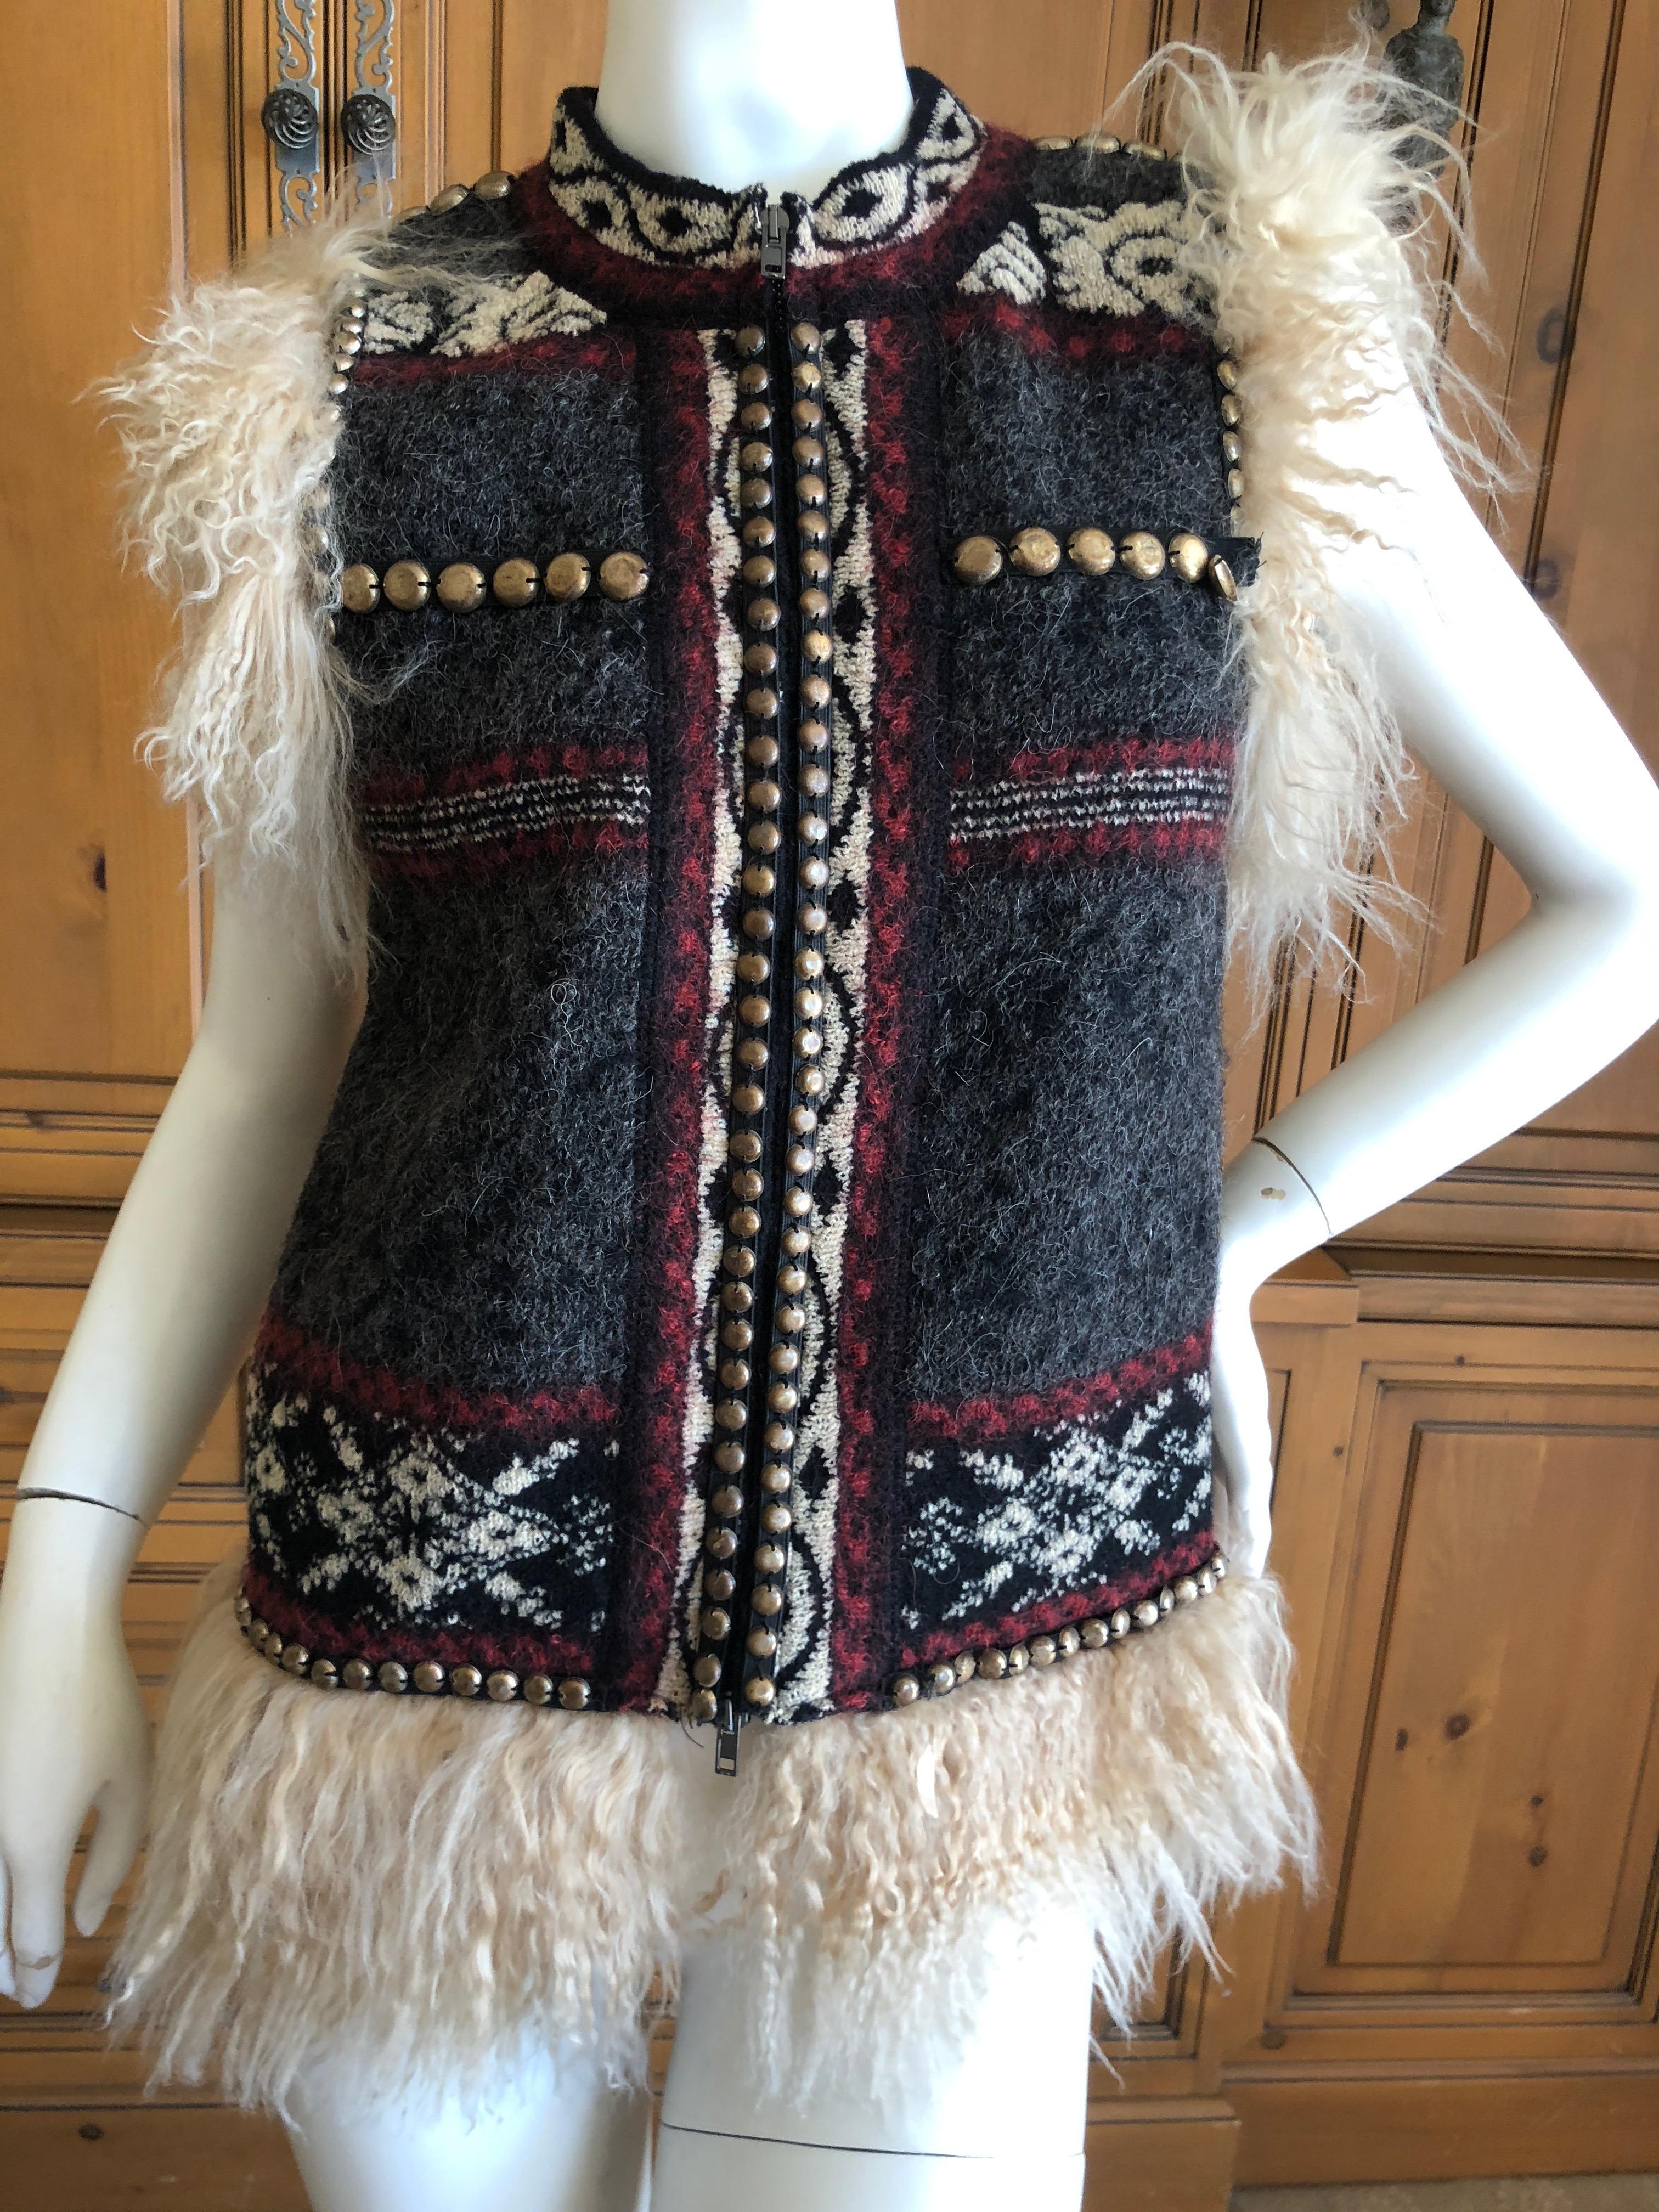 Terrific Vintage Jean Paul Gaultier Maille Femme Studded Boho Ethnic Vest with Curly Lamb Trim.
Size small but seems to run large
Bust 34